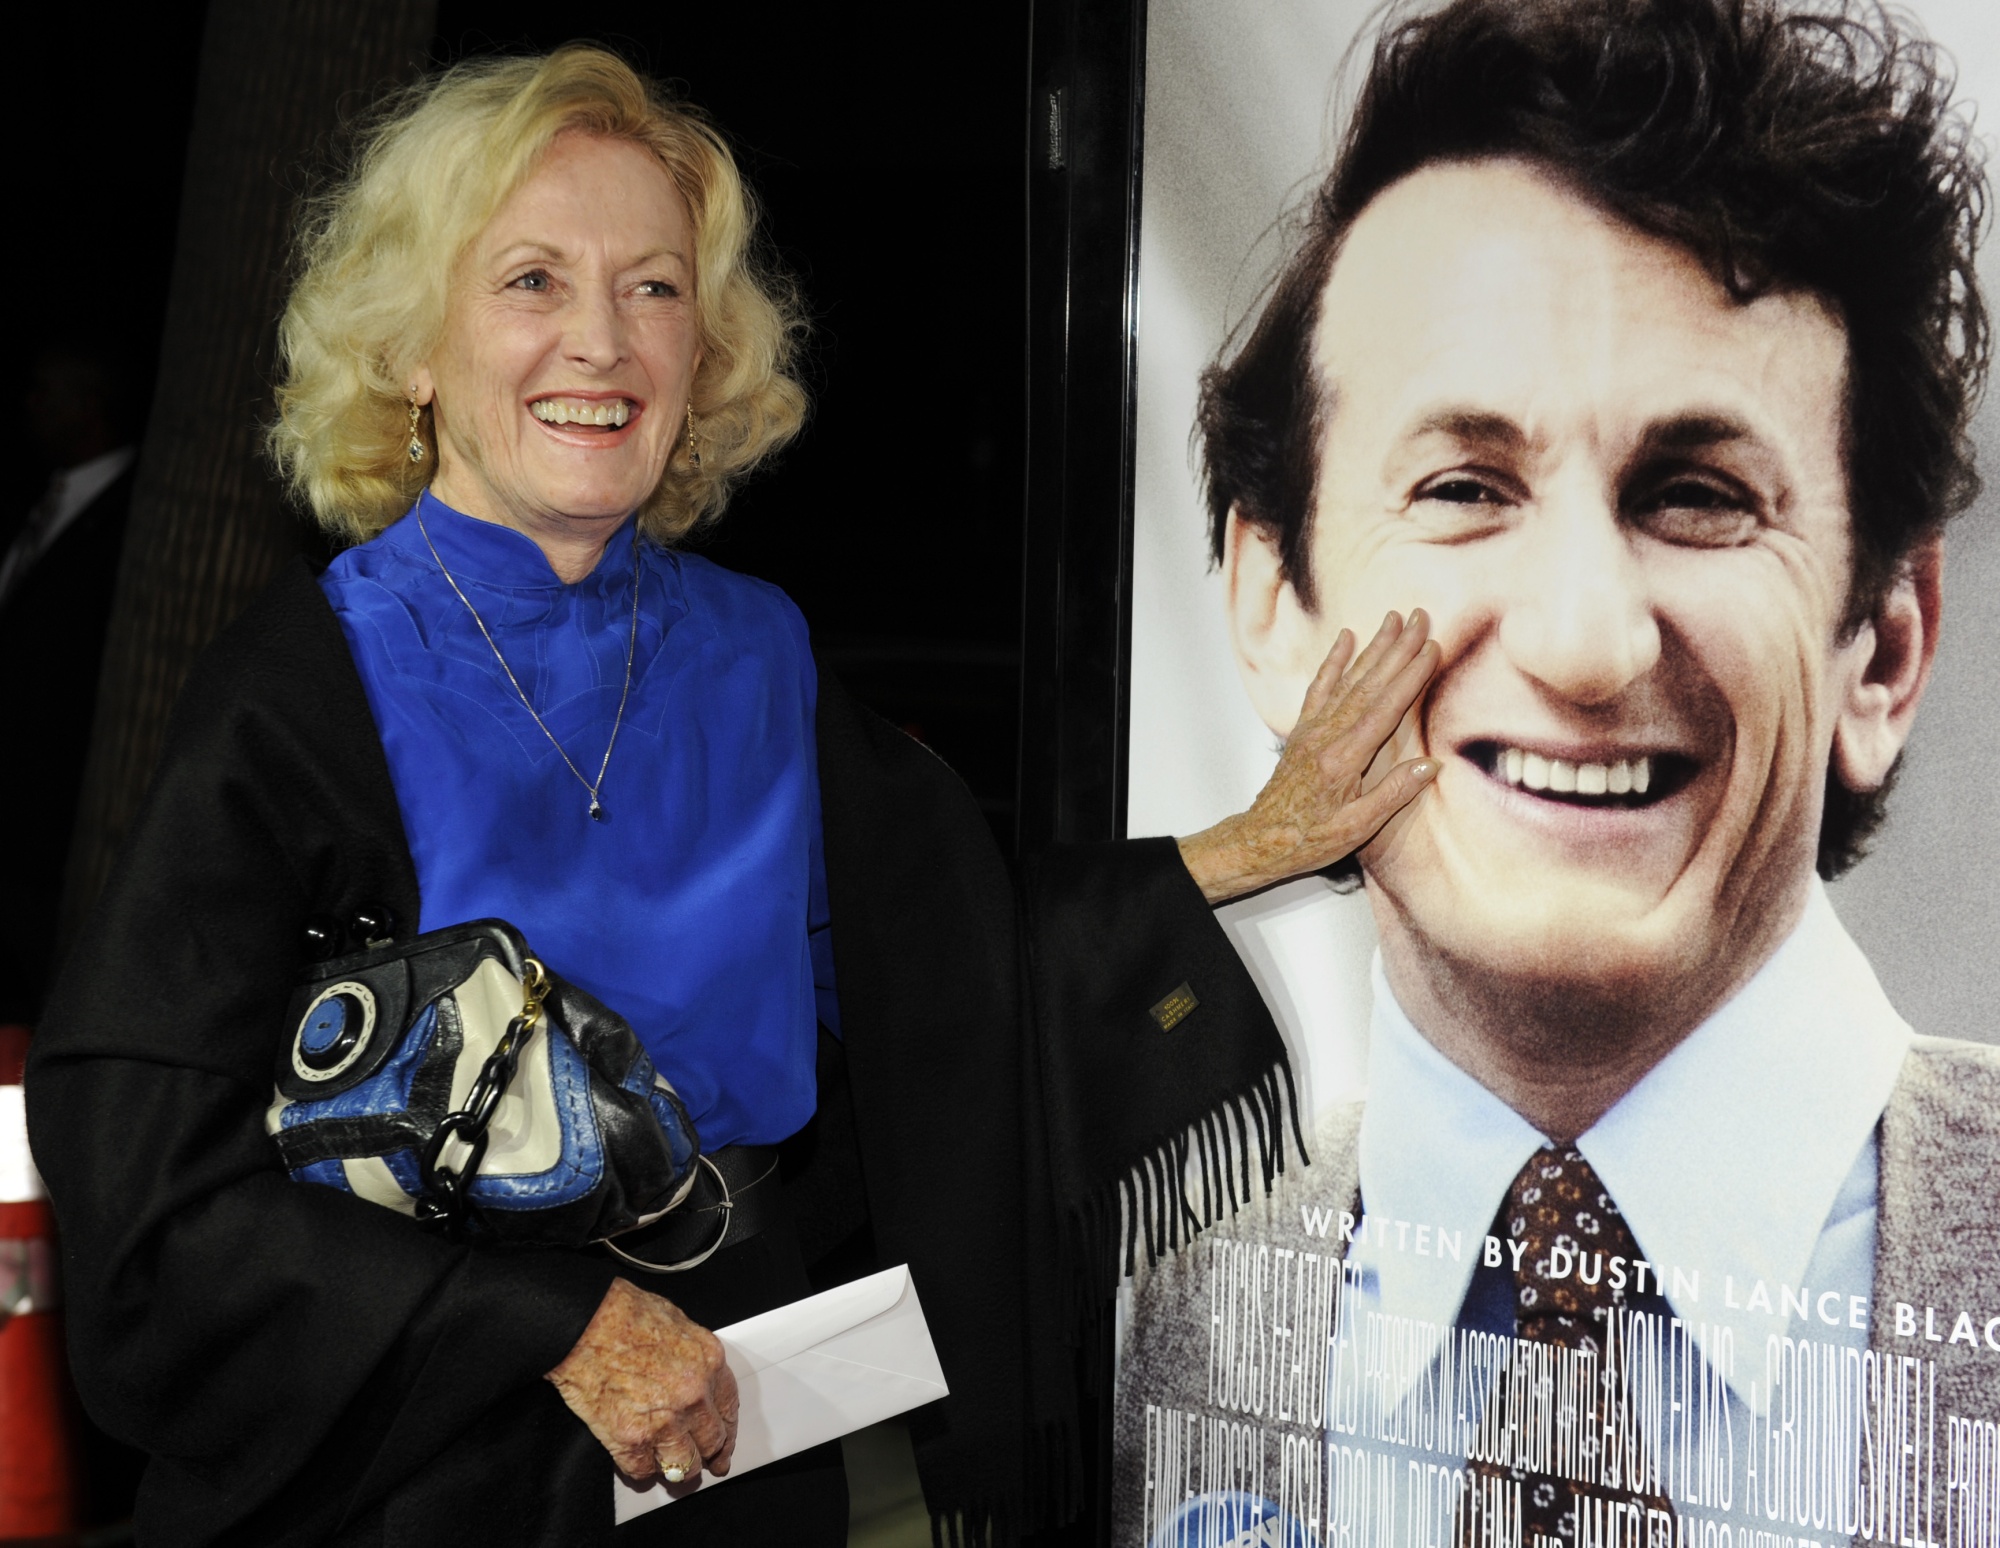 Eileen Ryan, mother of actor Sean Penn, touches her son's image on the poster at the premiere of &quot;Milk&quot; in Beverly Hills, Calif., on Nov. 13, 2008.  (AP Photo/Chris Pizzello, File)